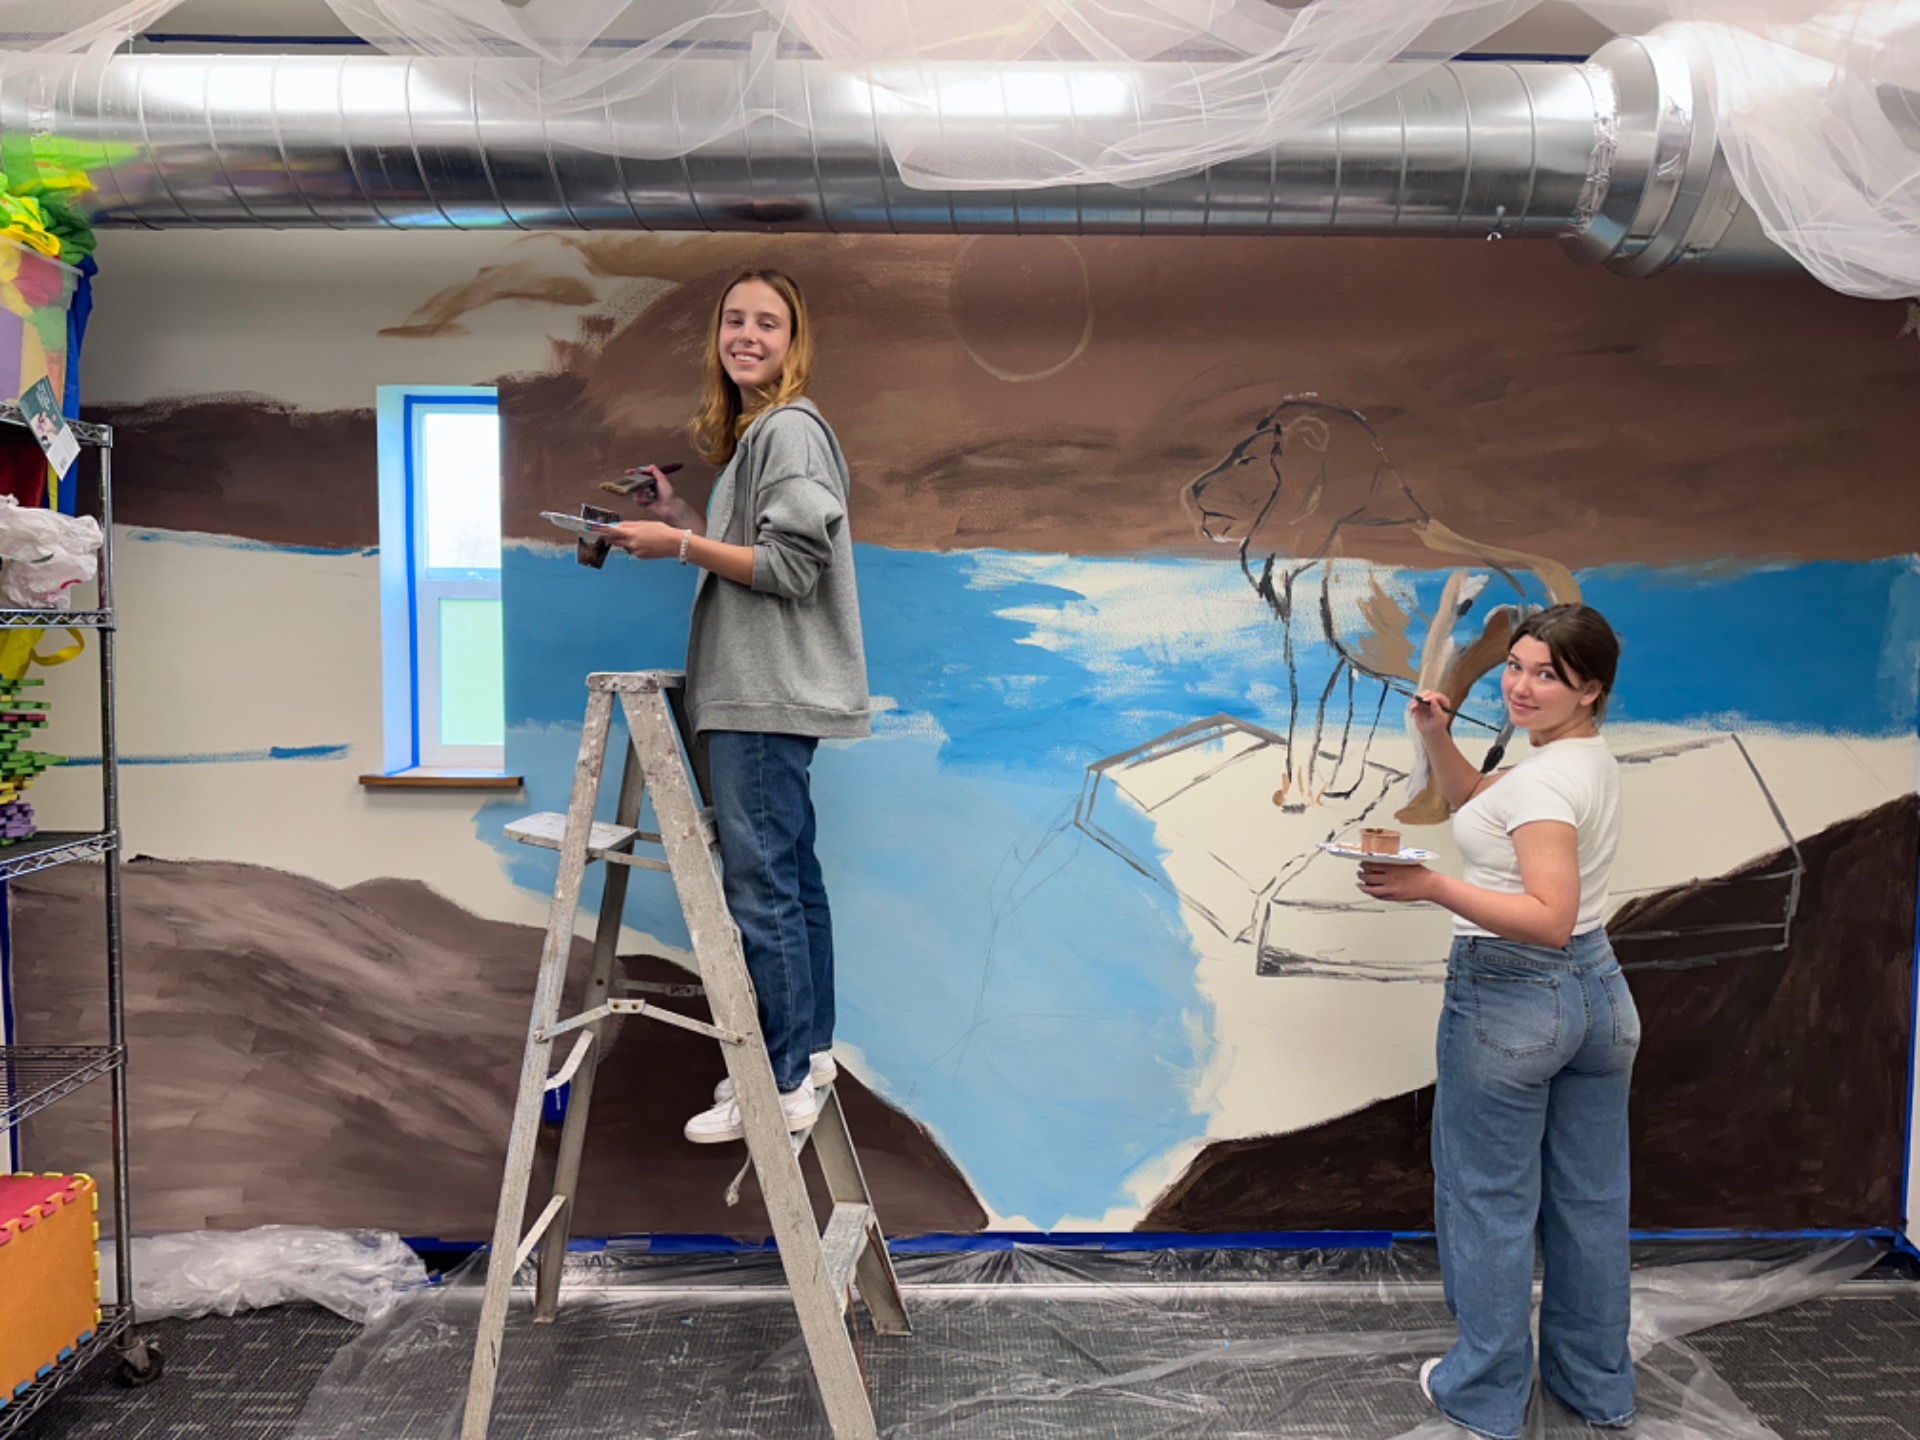 The Murals are Coming Together!